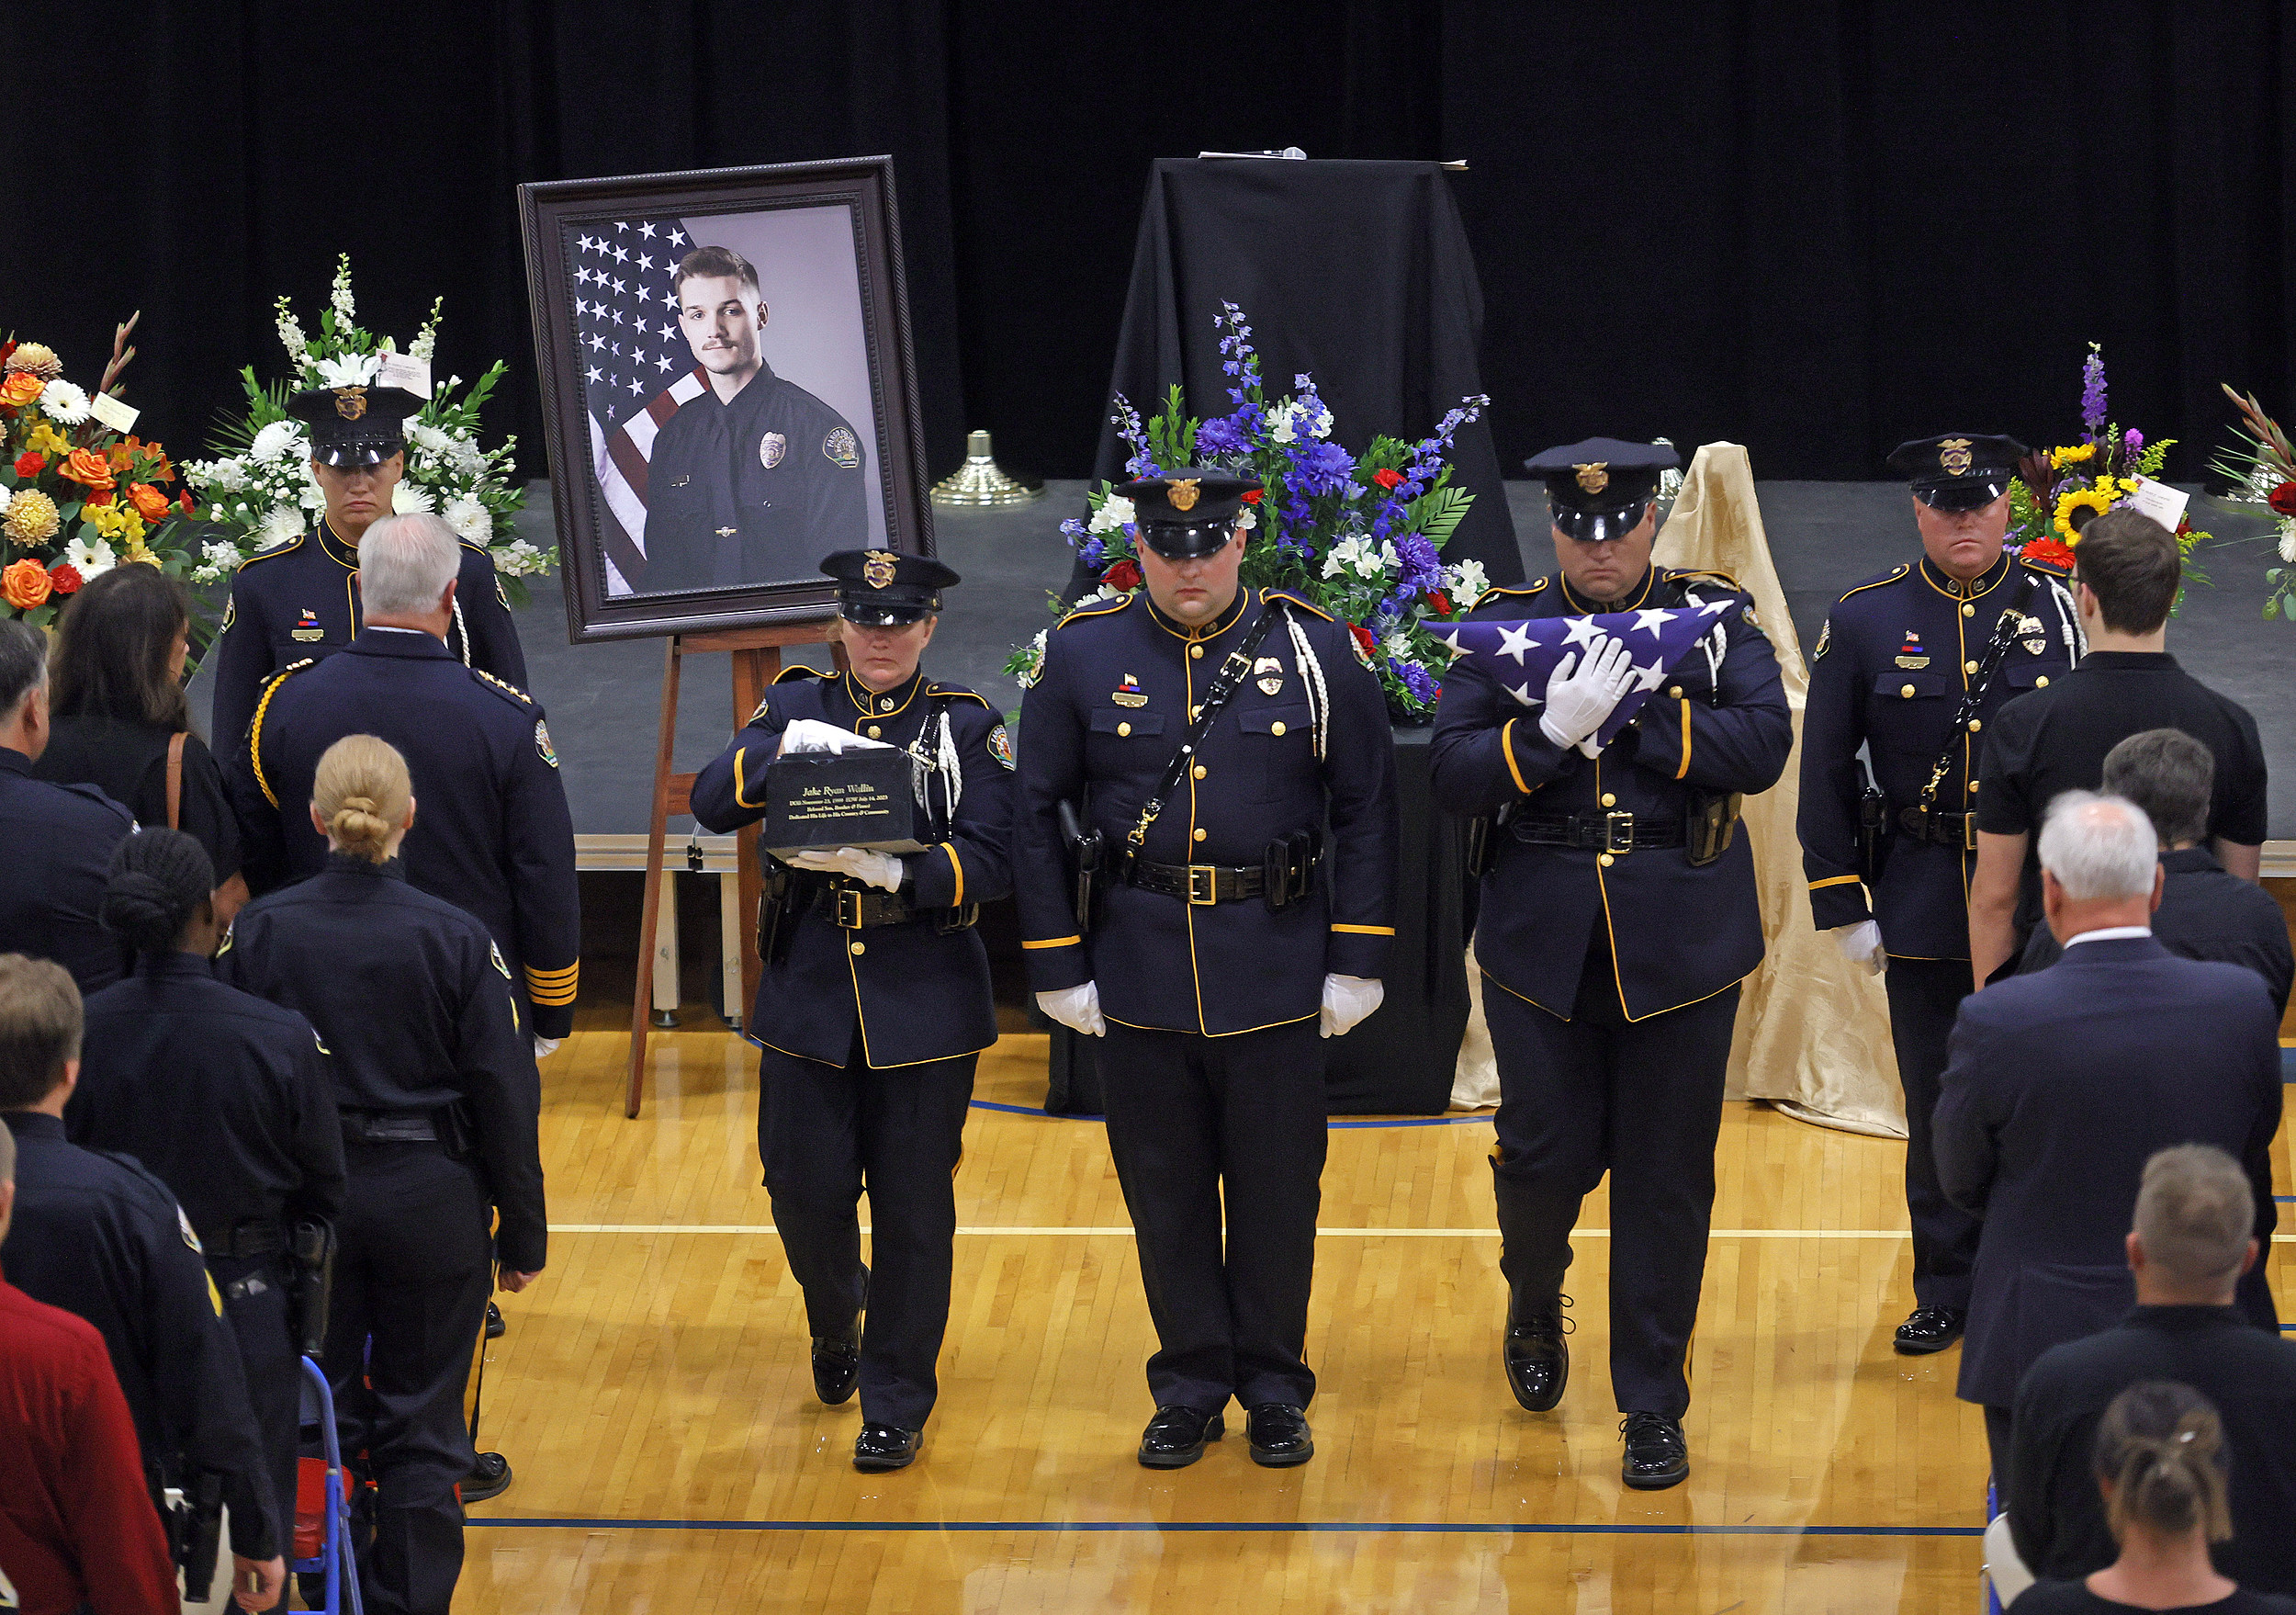 Fargo officer killed in ambush remembered as 'brave young man'